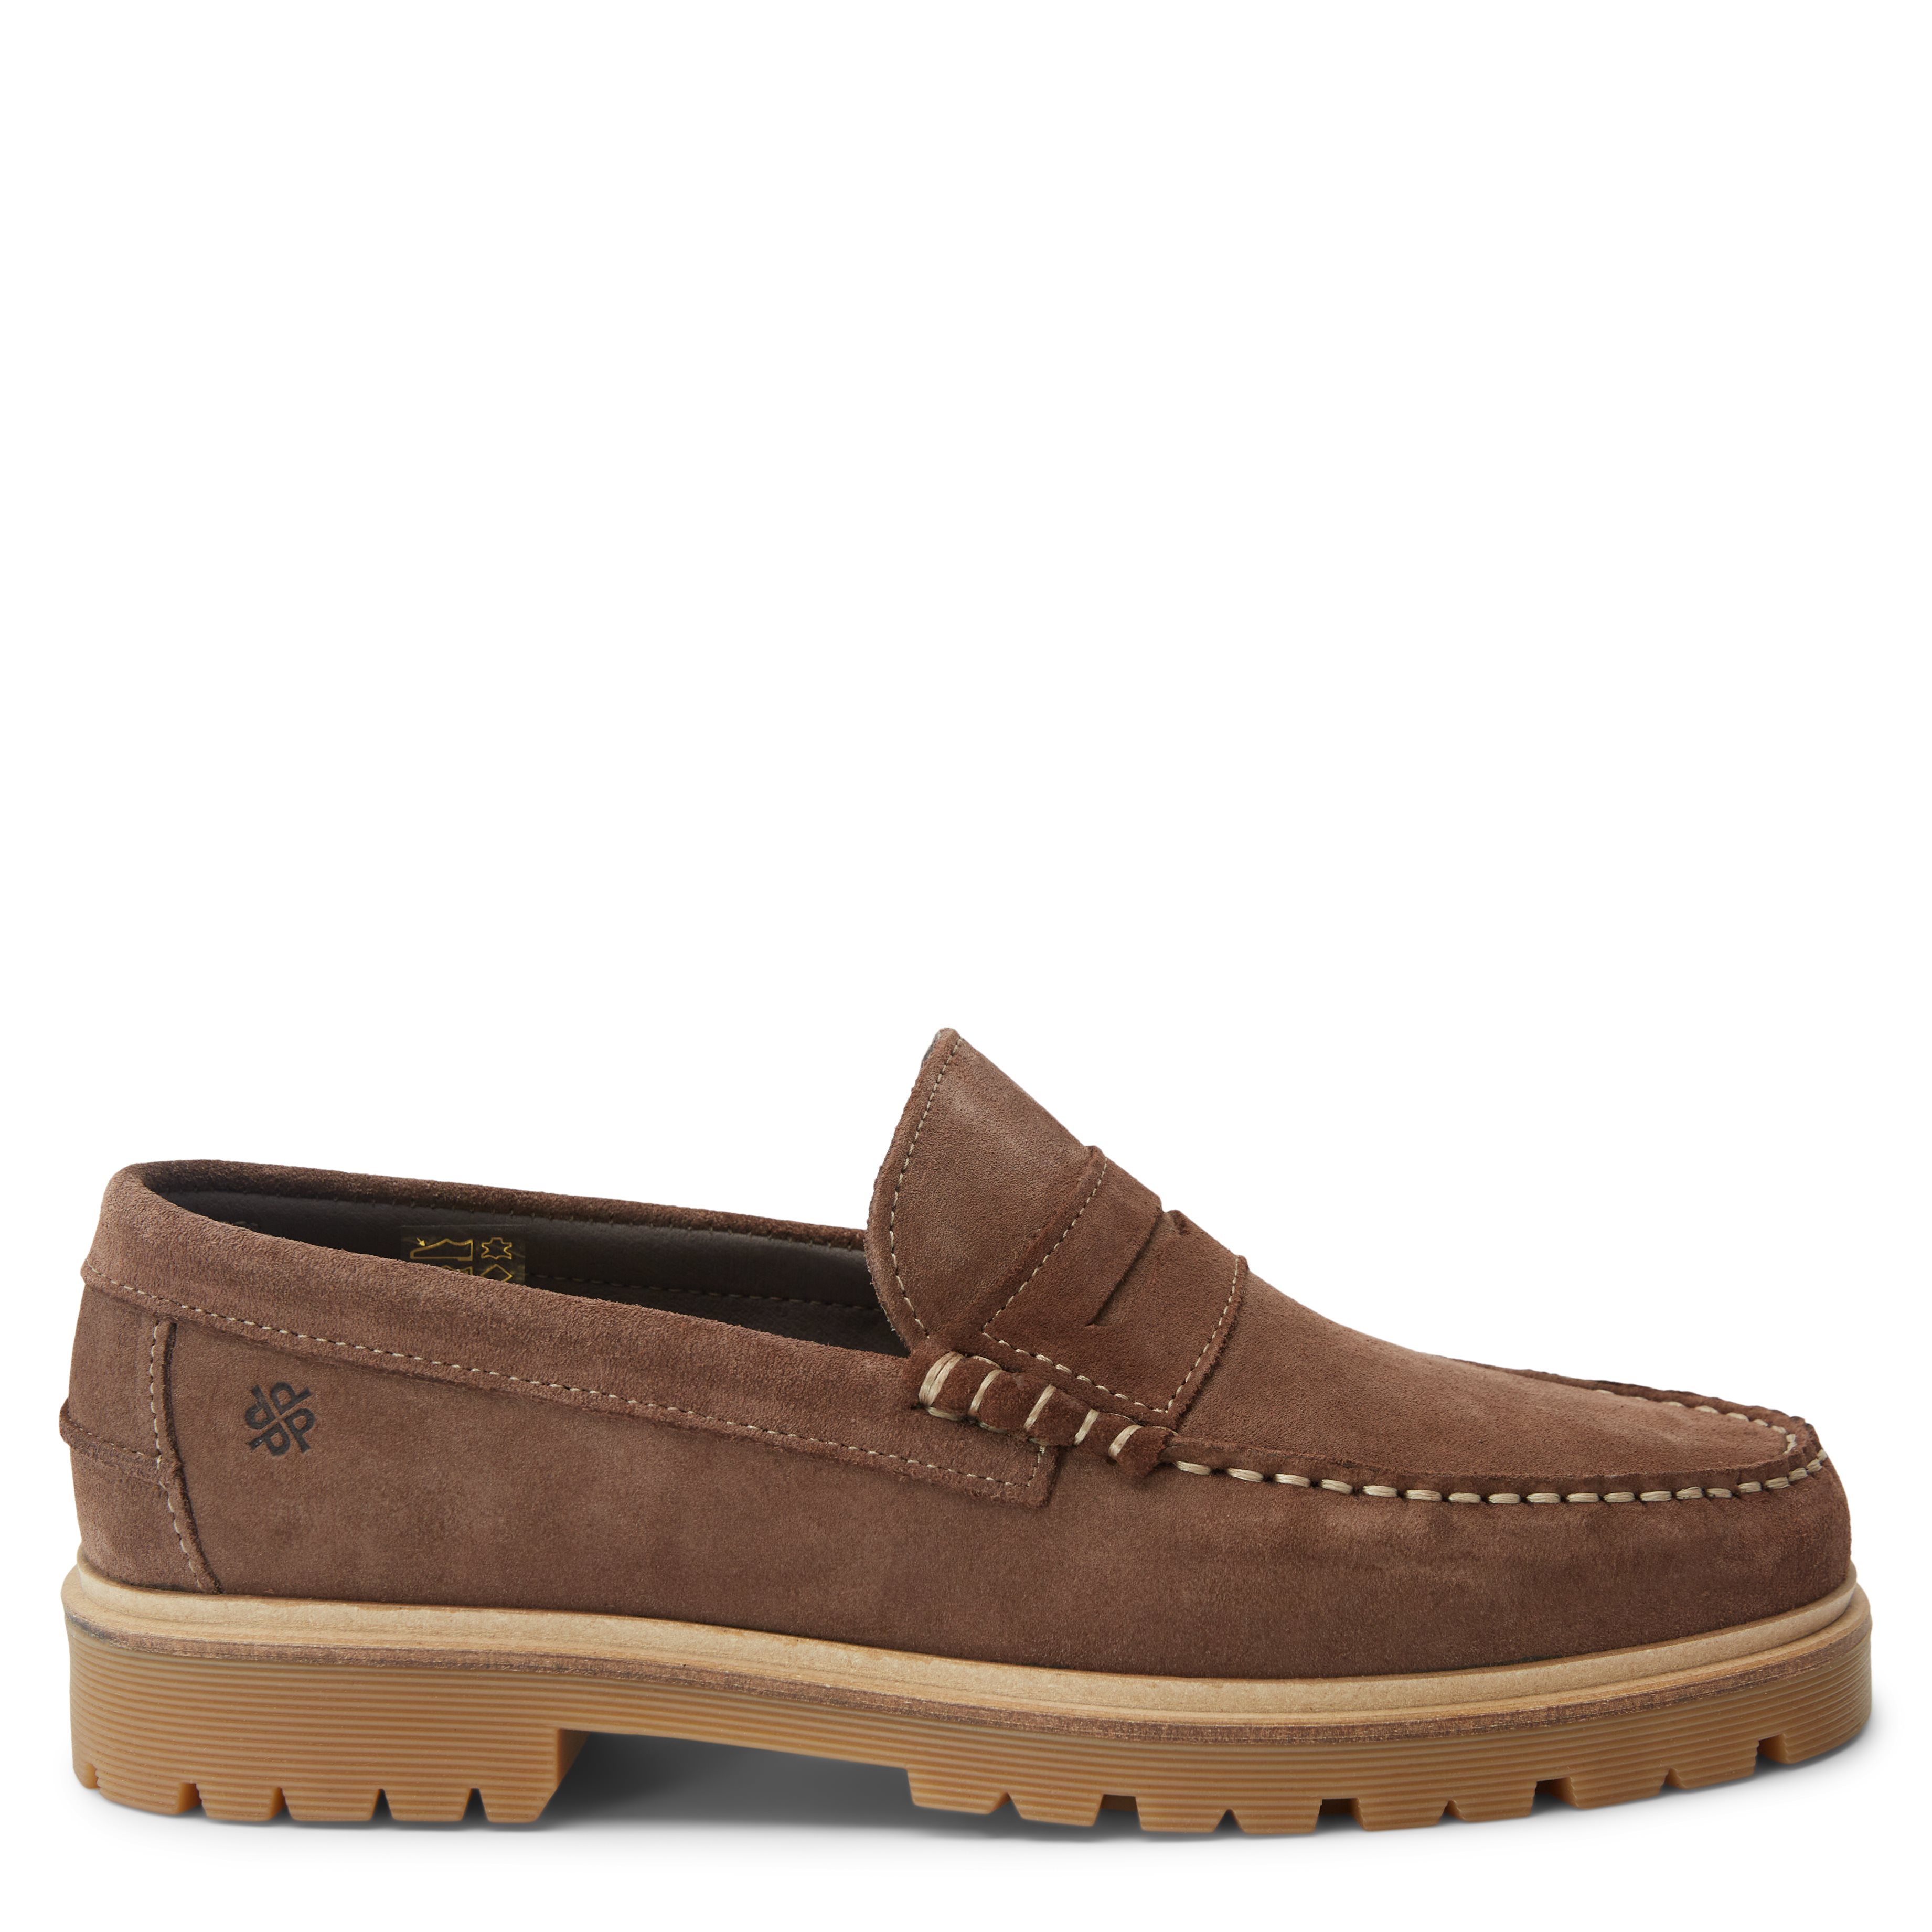 Playboy Shoes AUSTIN SUEDE 2.0 Brown